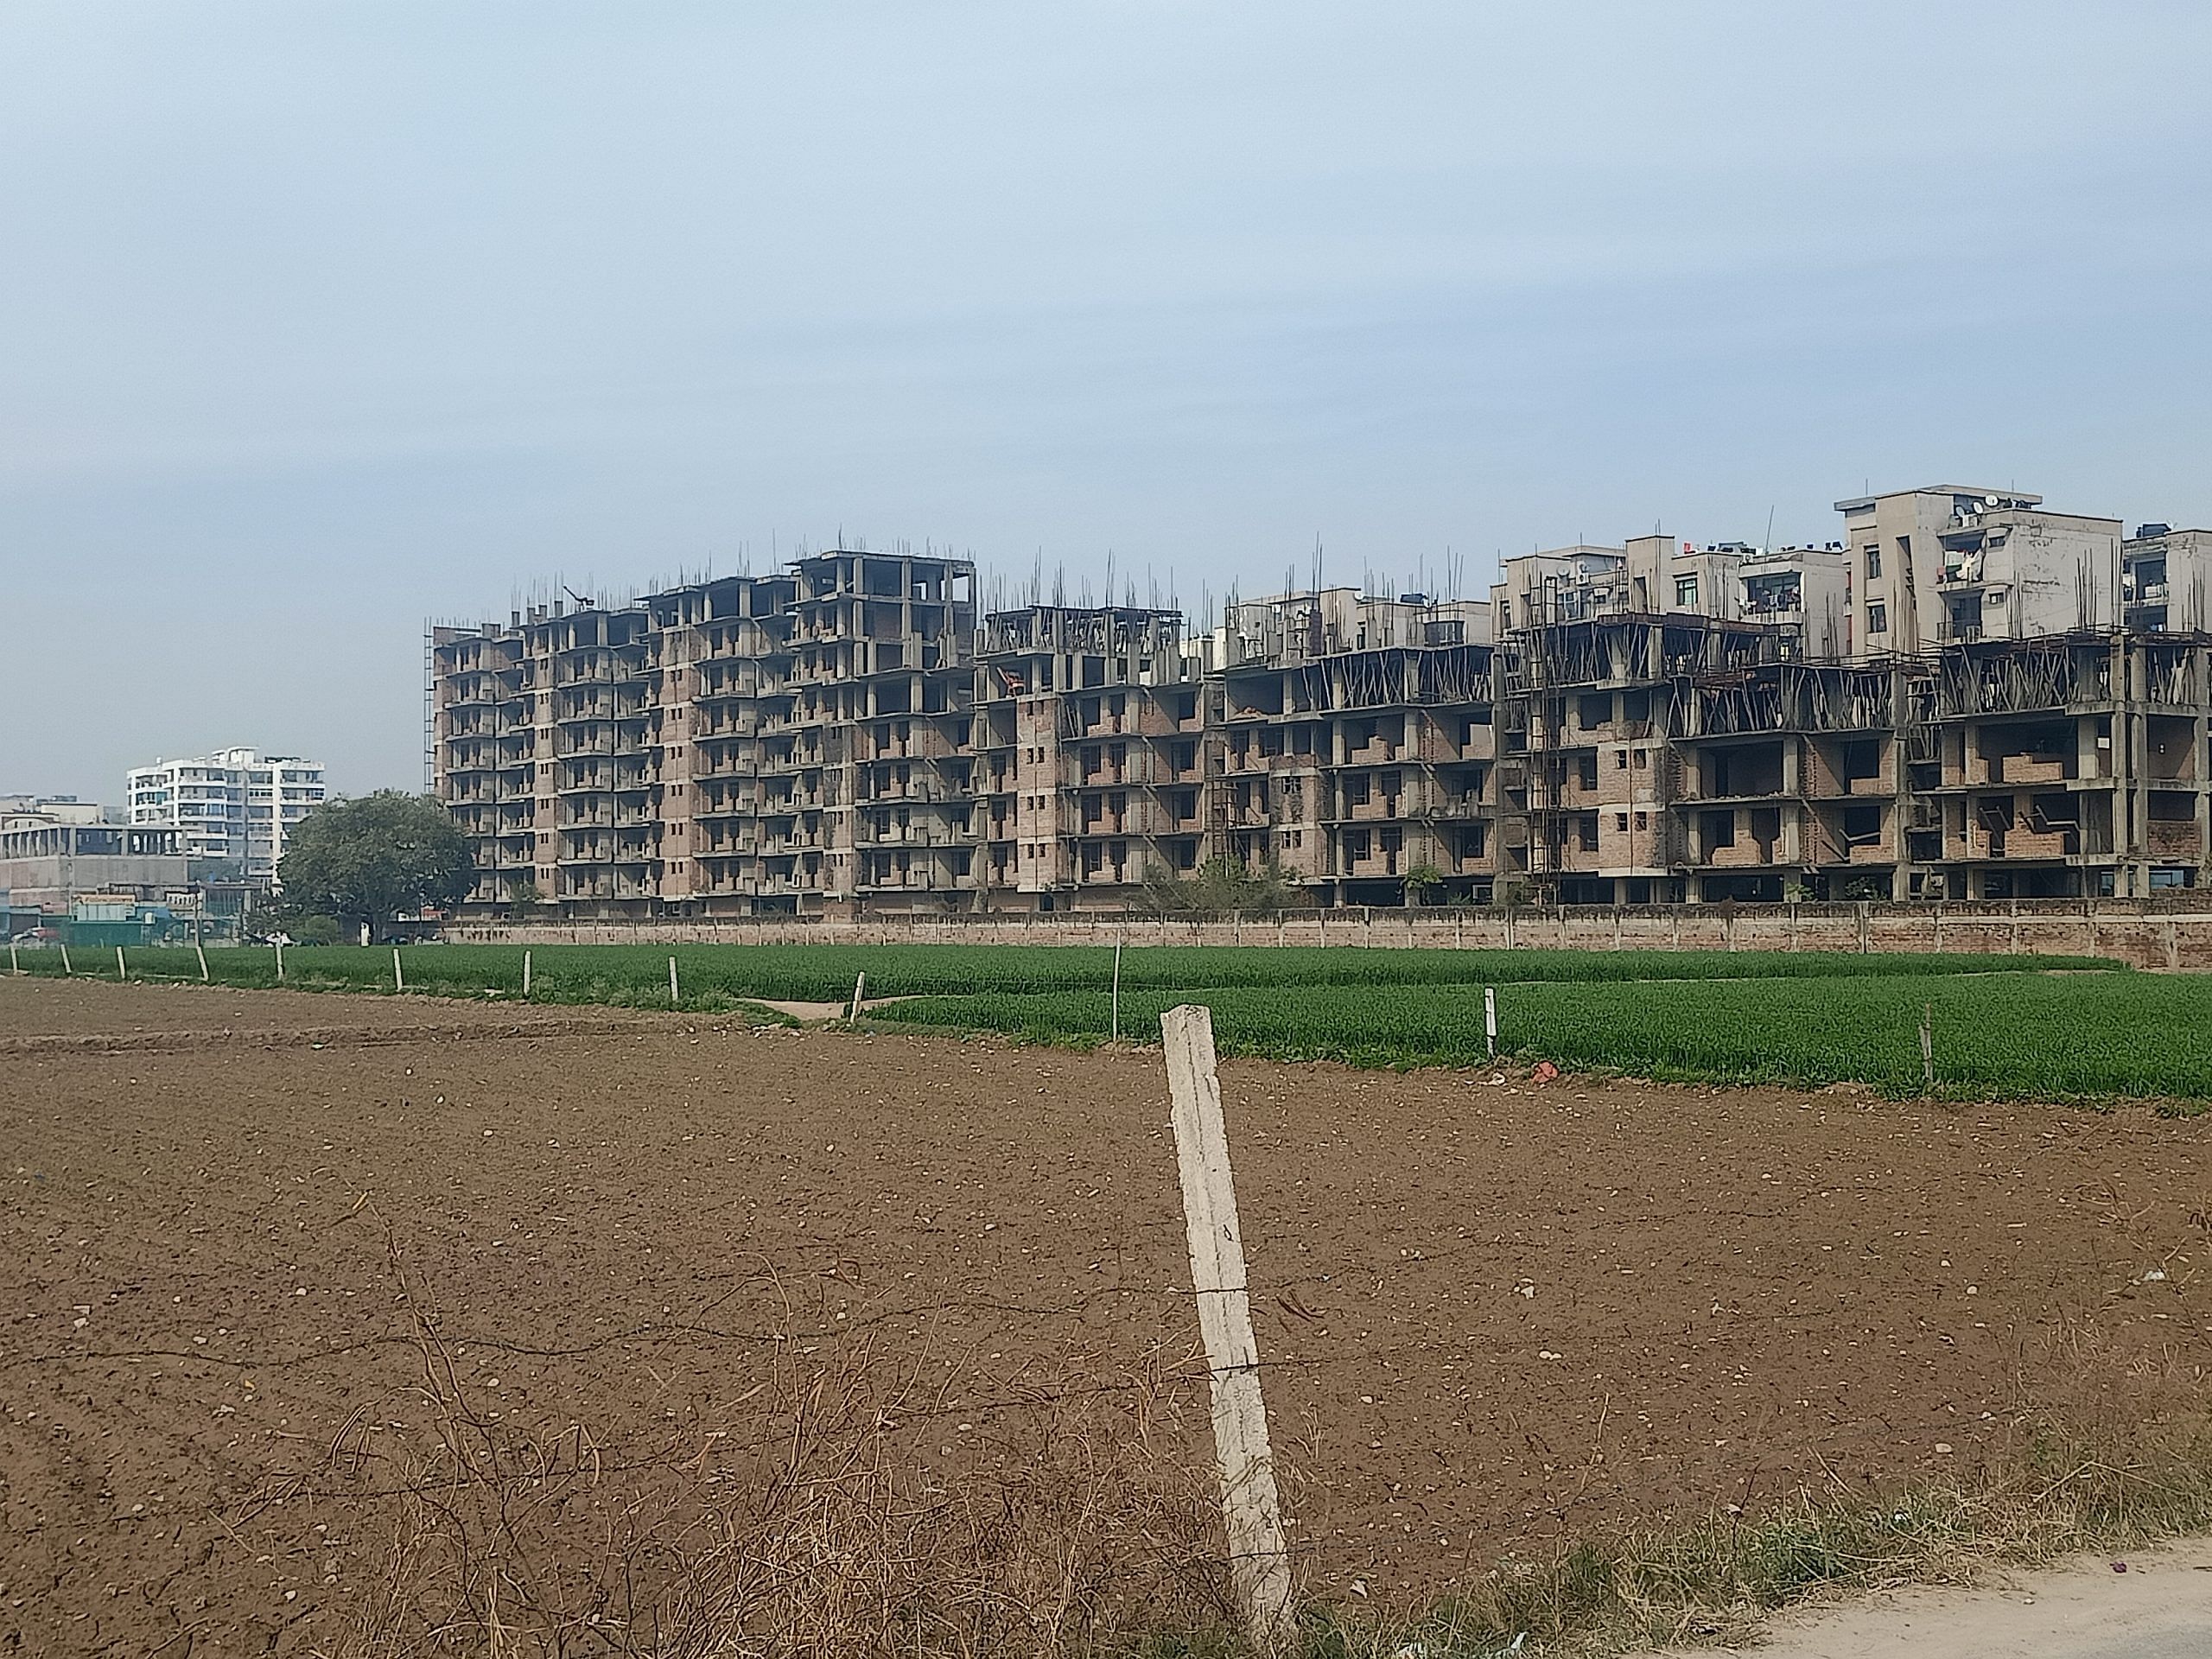 A view of ongoing construction at a site in Mohali. | Photo: Sahil Sharma